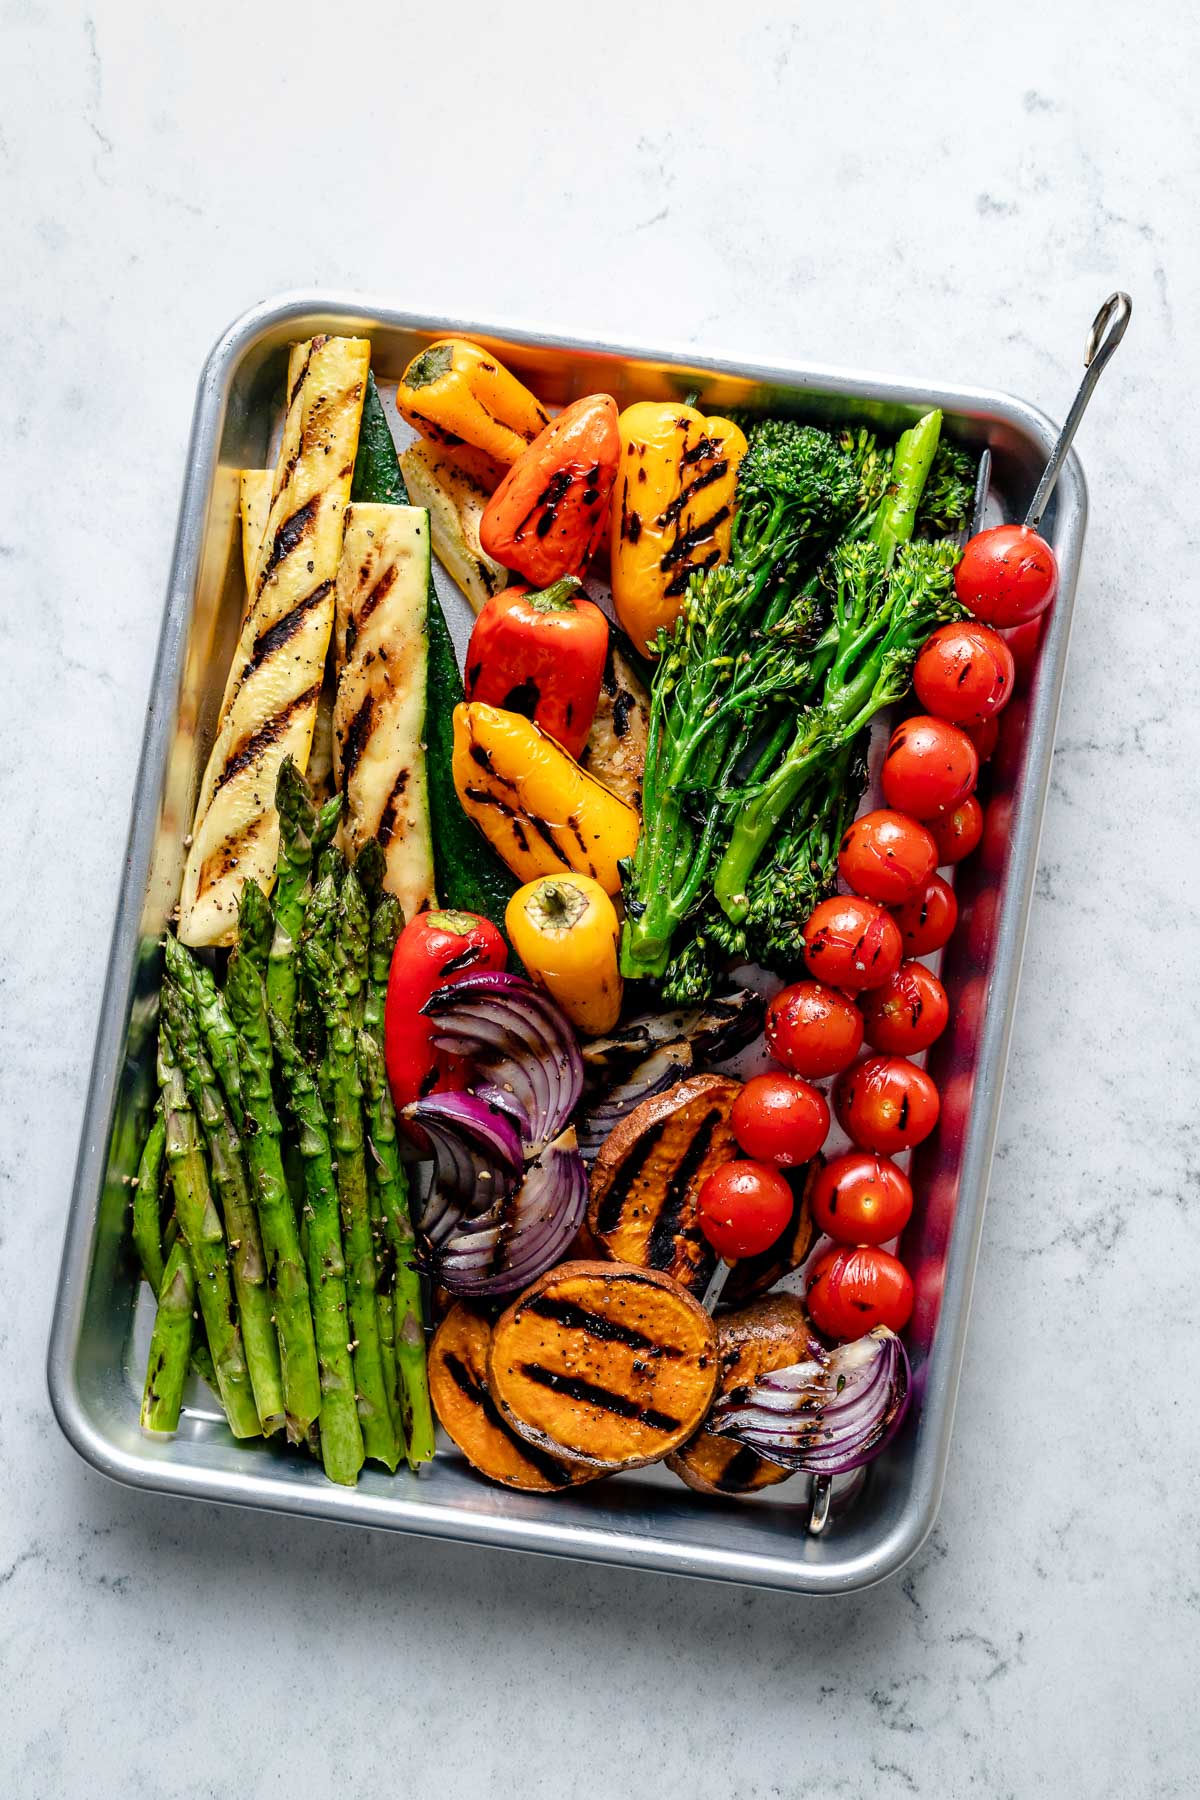 Grilled vegetables, including grilled tomato skewers, grilled red onion, grilled sweet potato, grilled broccolini, grilled bell peppers, grilled zucchini, & grilled asparagus seasoned with avocado oil, kosher salt, & ground black pepper are arranged on an aluminum baking sheet. The baking sheet sits on top of a blue & white marble surface.